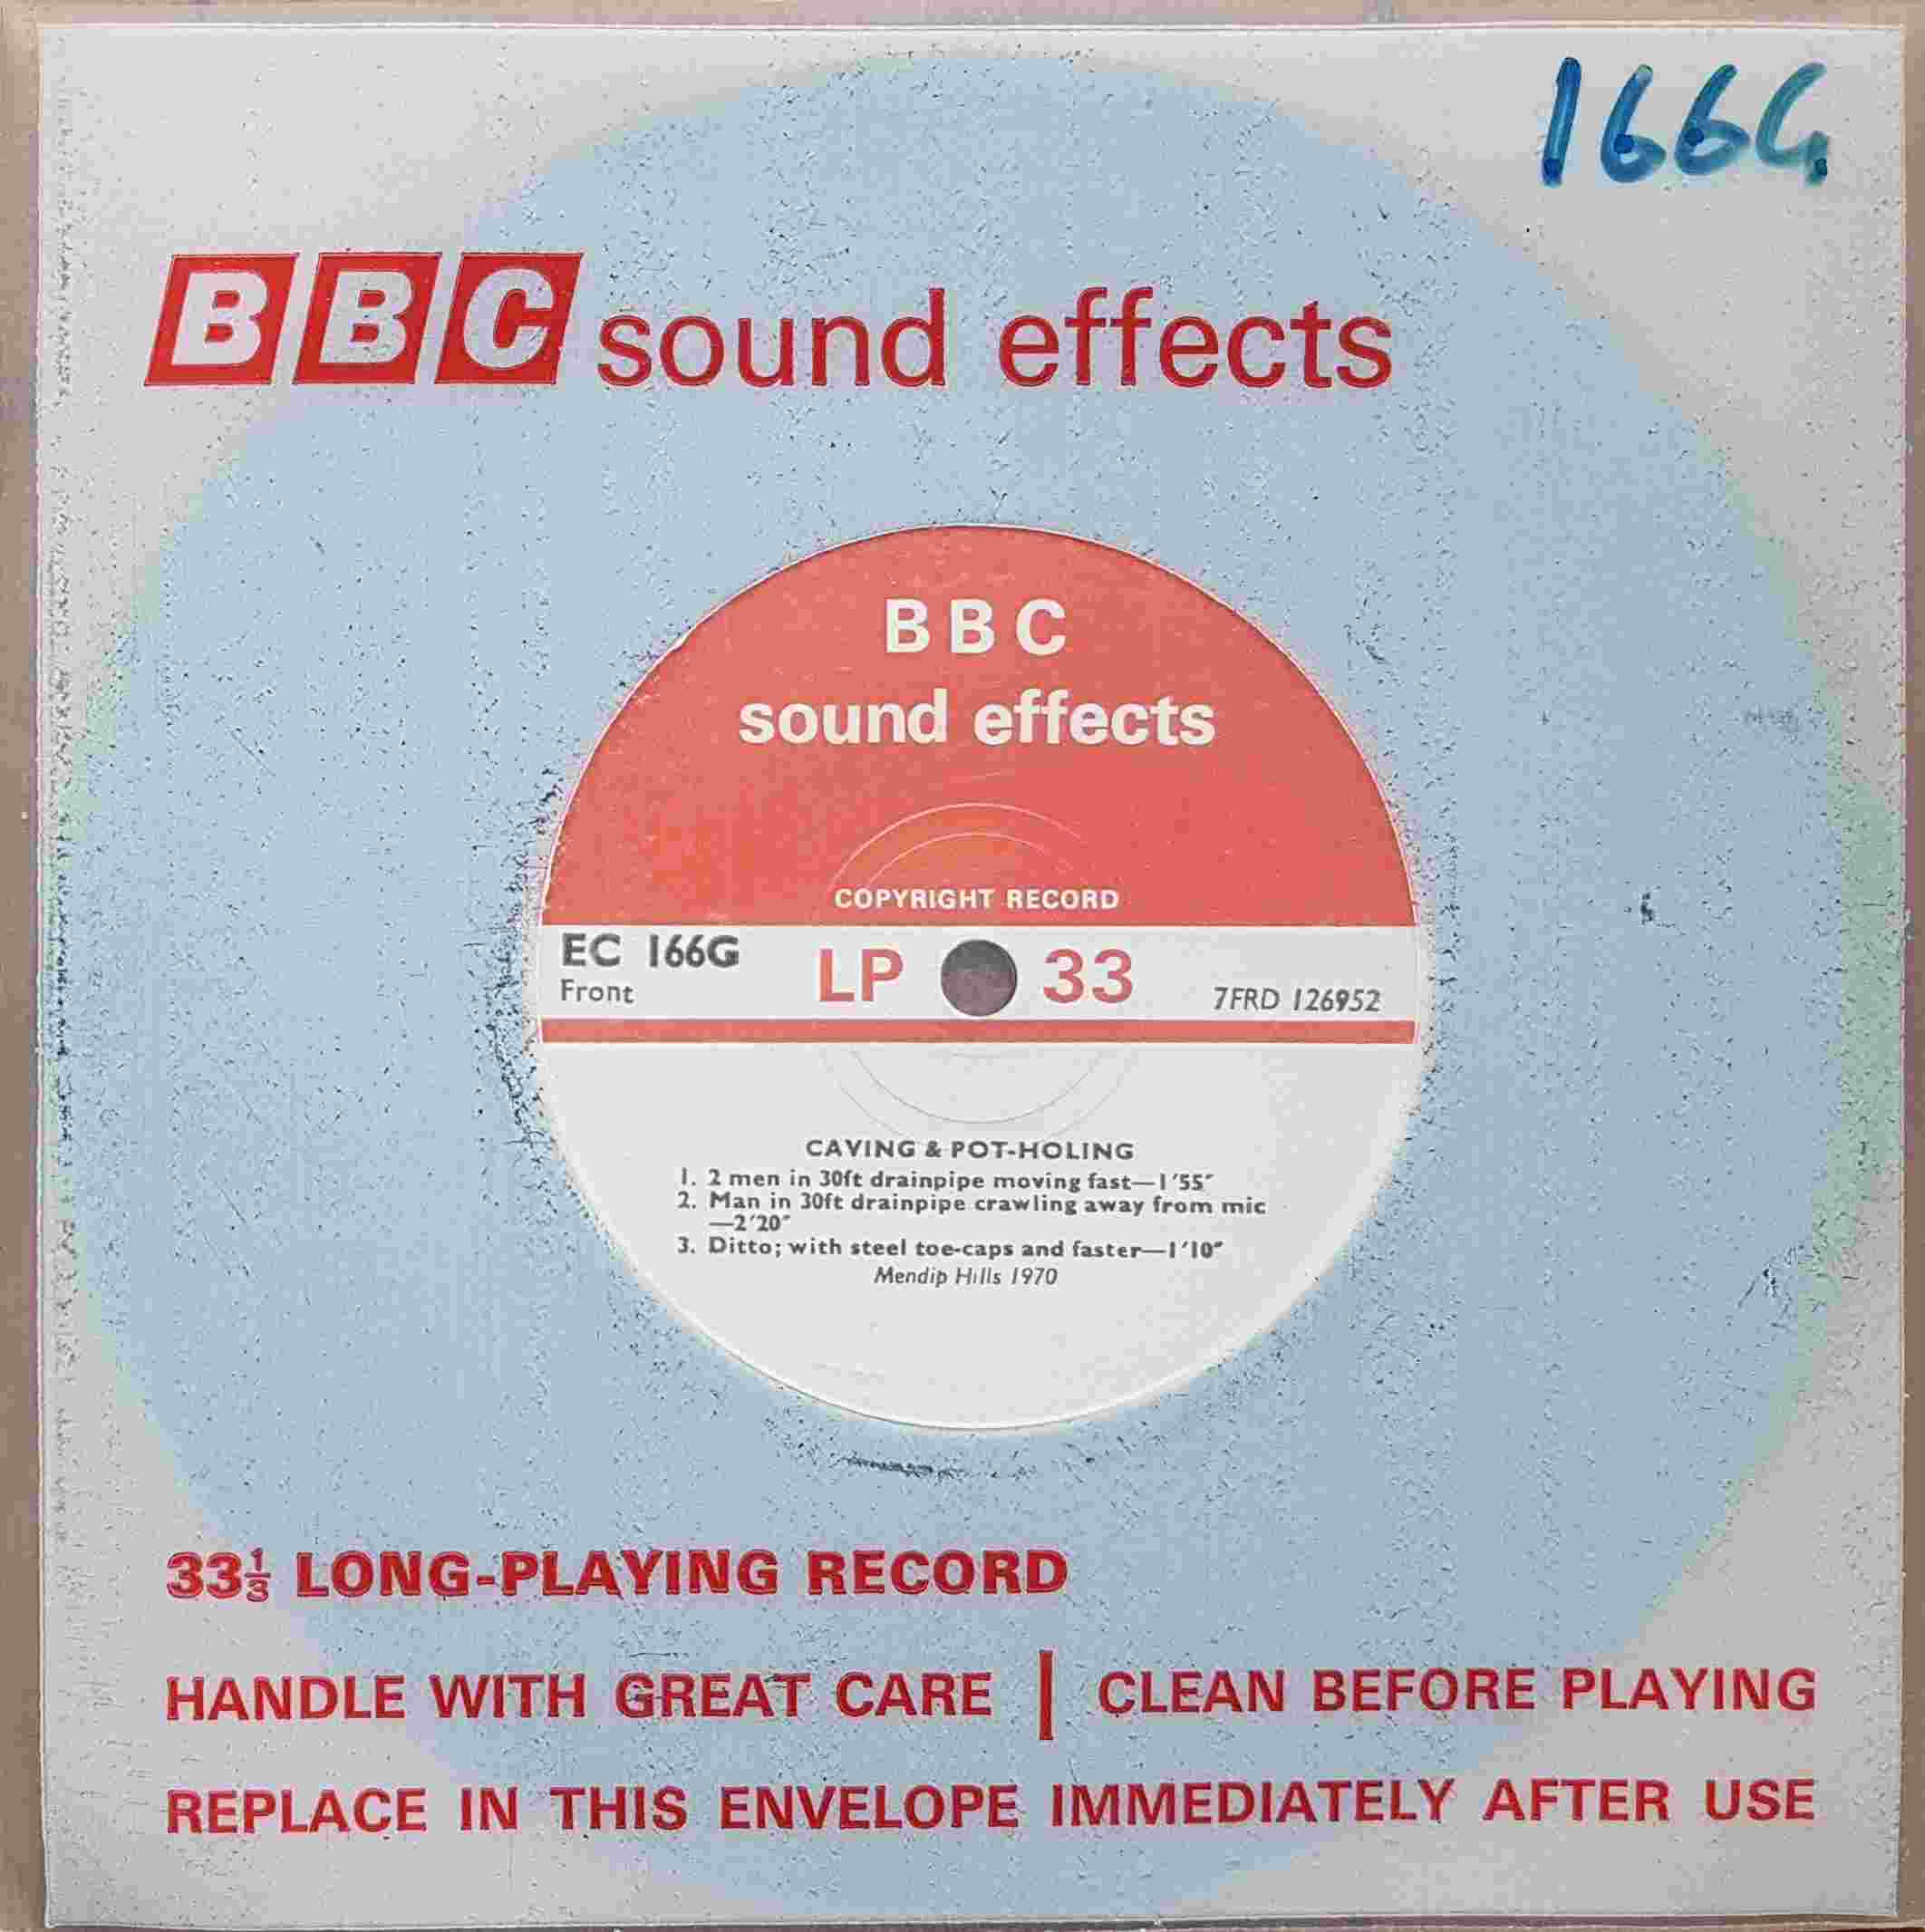 Picture of EC 166G Caving & pot-holing by artist Not registered from the BBC singles - Records and Tapes library